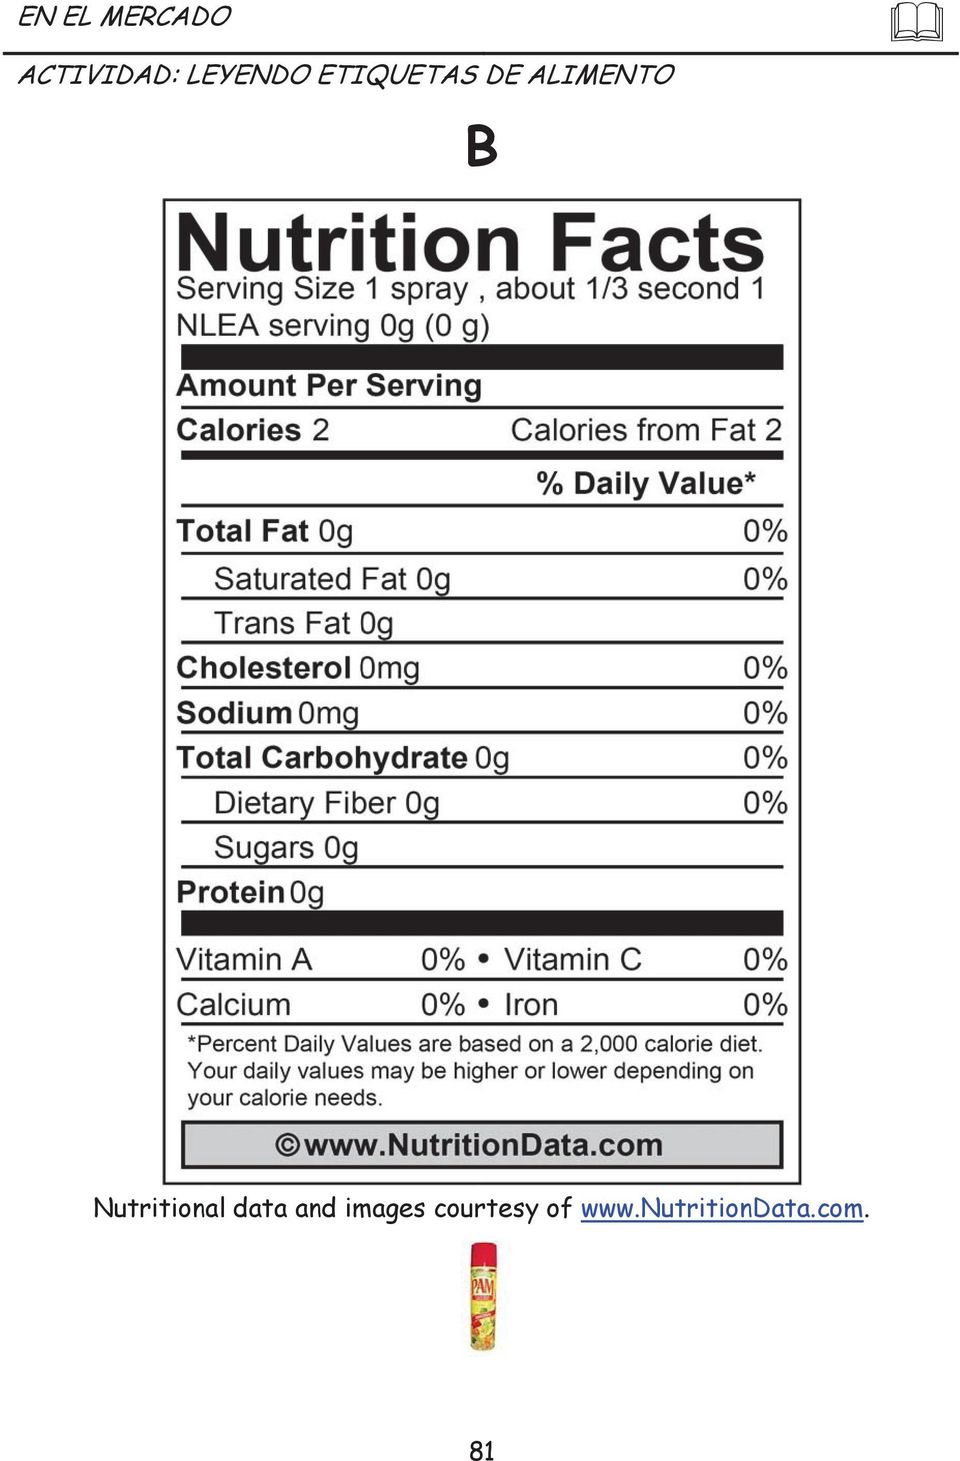 Nutritional data and